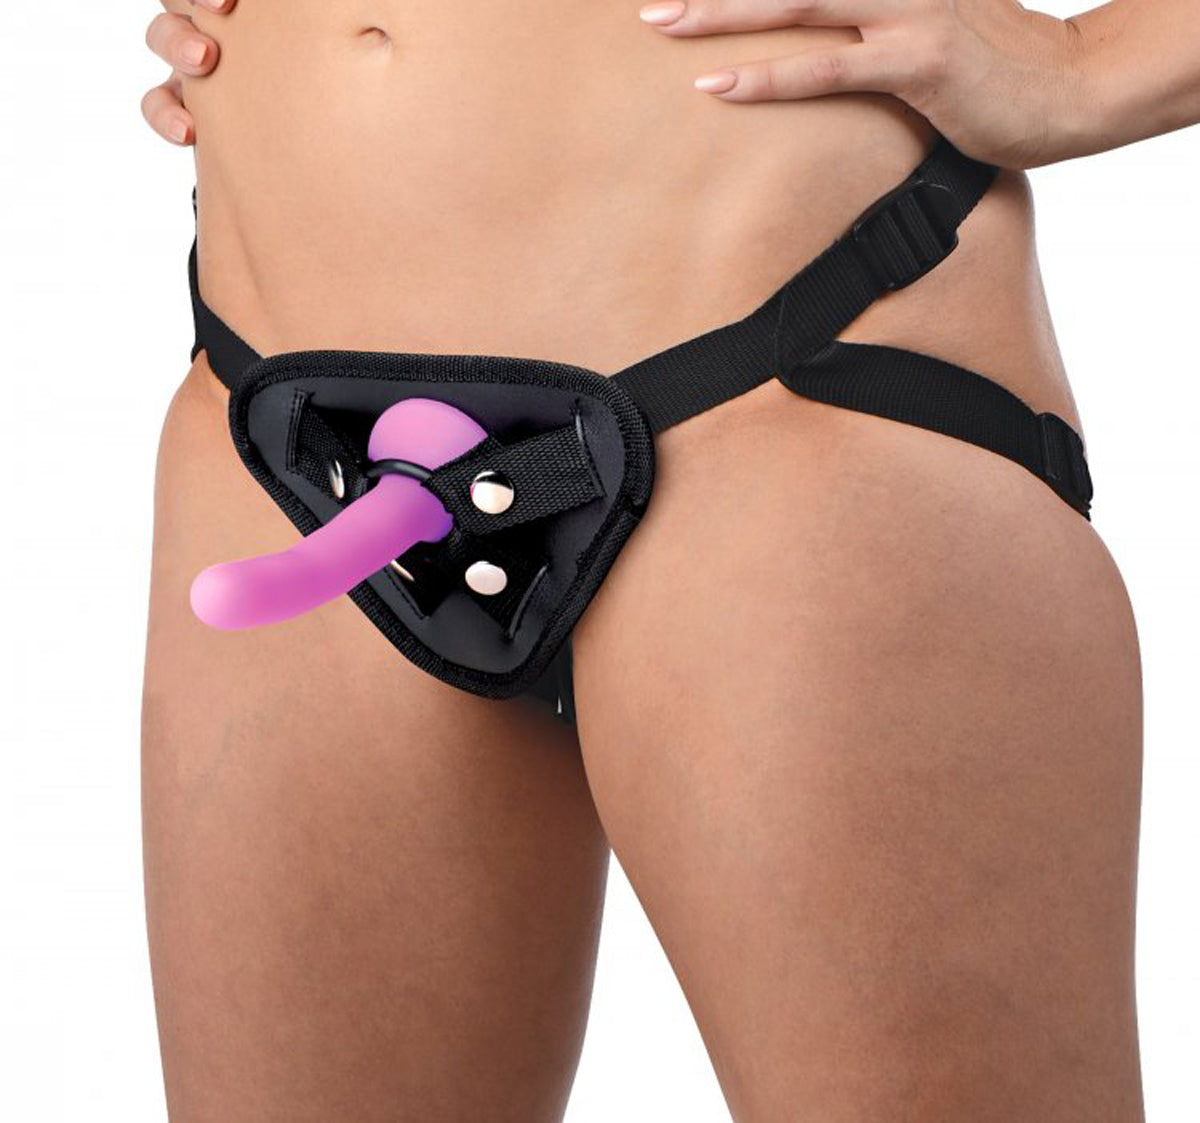 Double-G Deluxe Vibrerende Strap-On Set